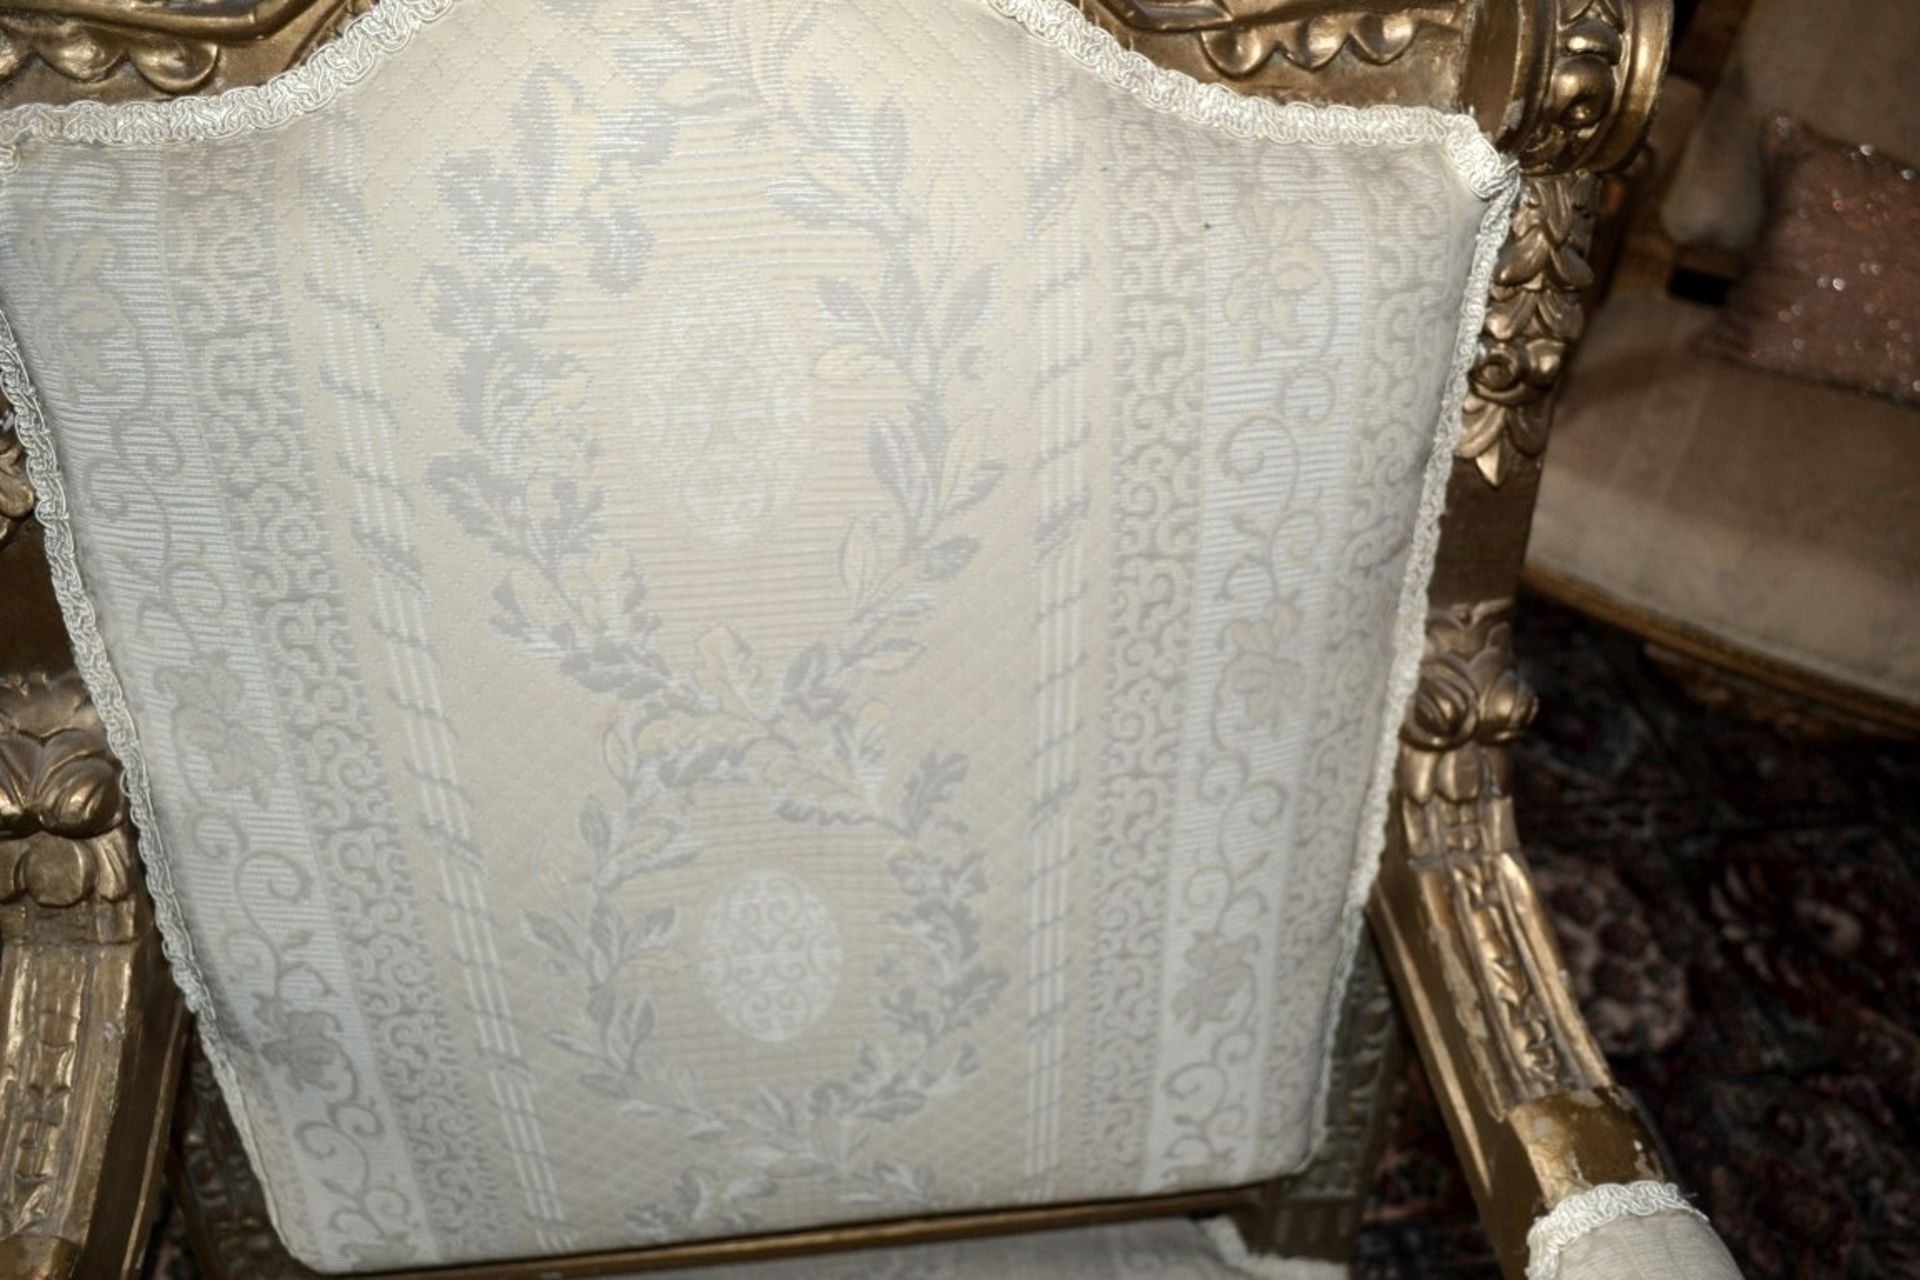 1 x Period Gold Gilt Armchair - Upholstered In A Rich Cream Fabric - From A Grade II Listed Hall - Image 6 of 9